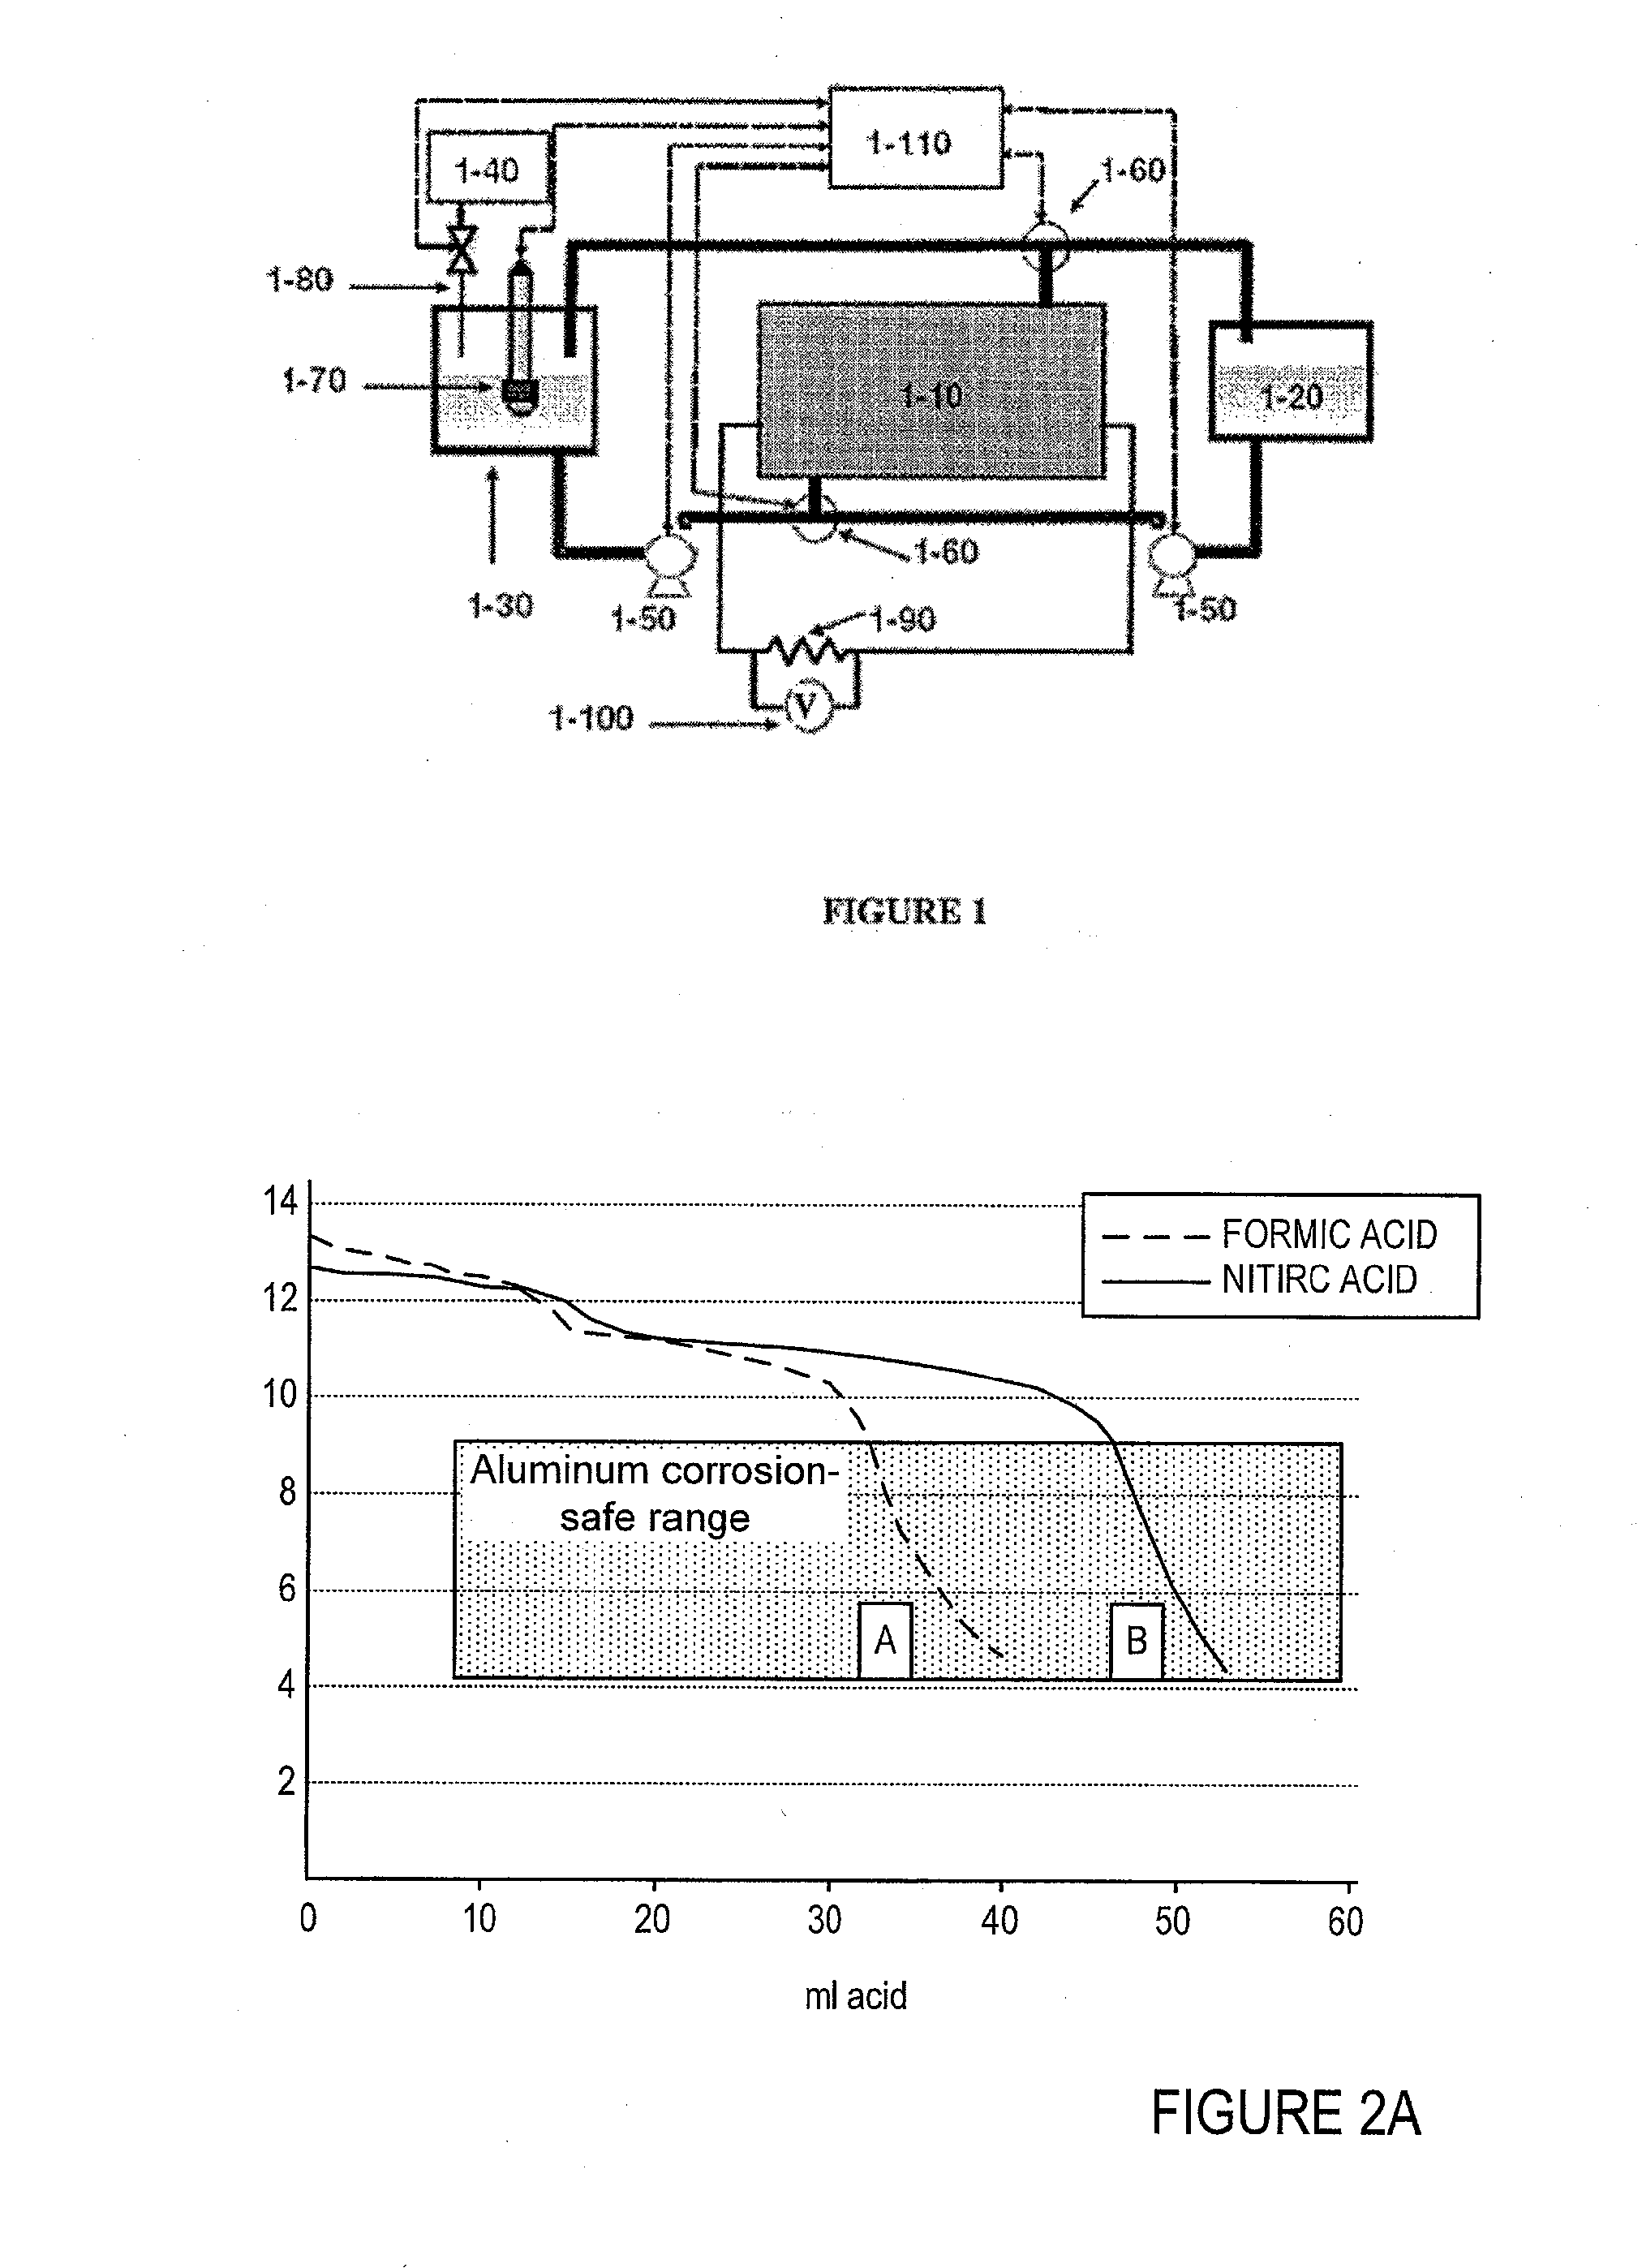 Shutdown system for metal-air batteries and methods of use thereof